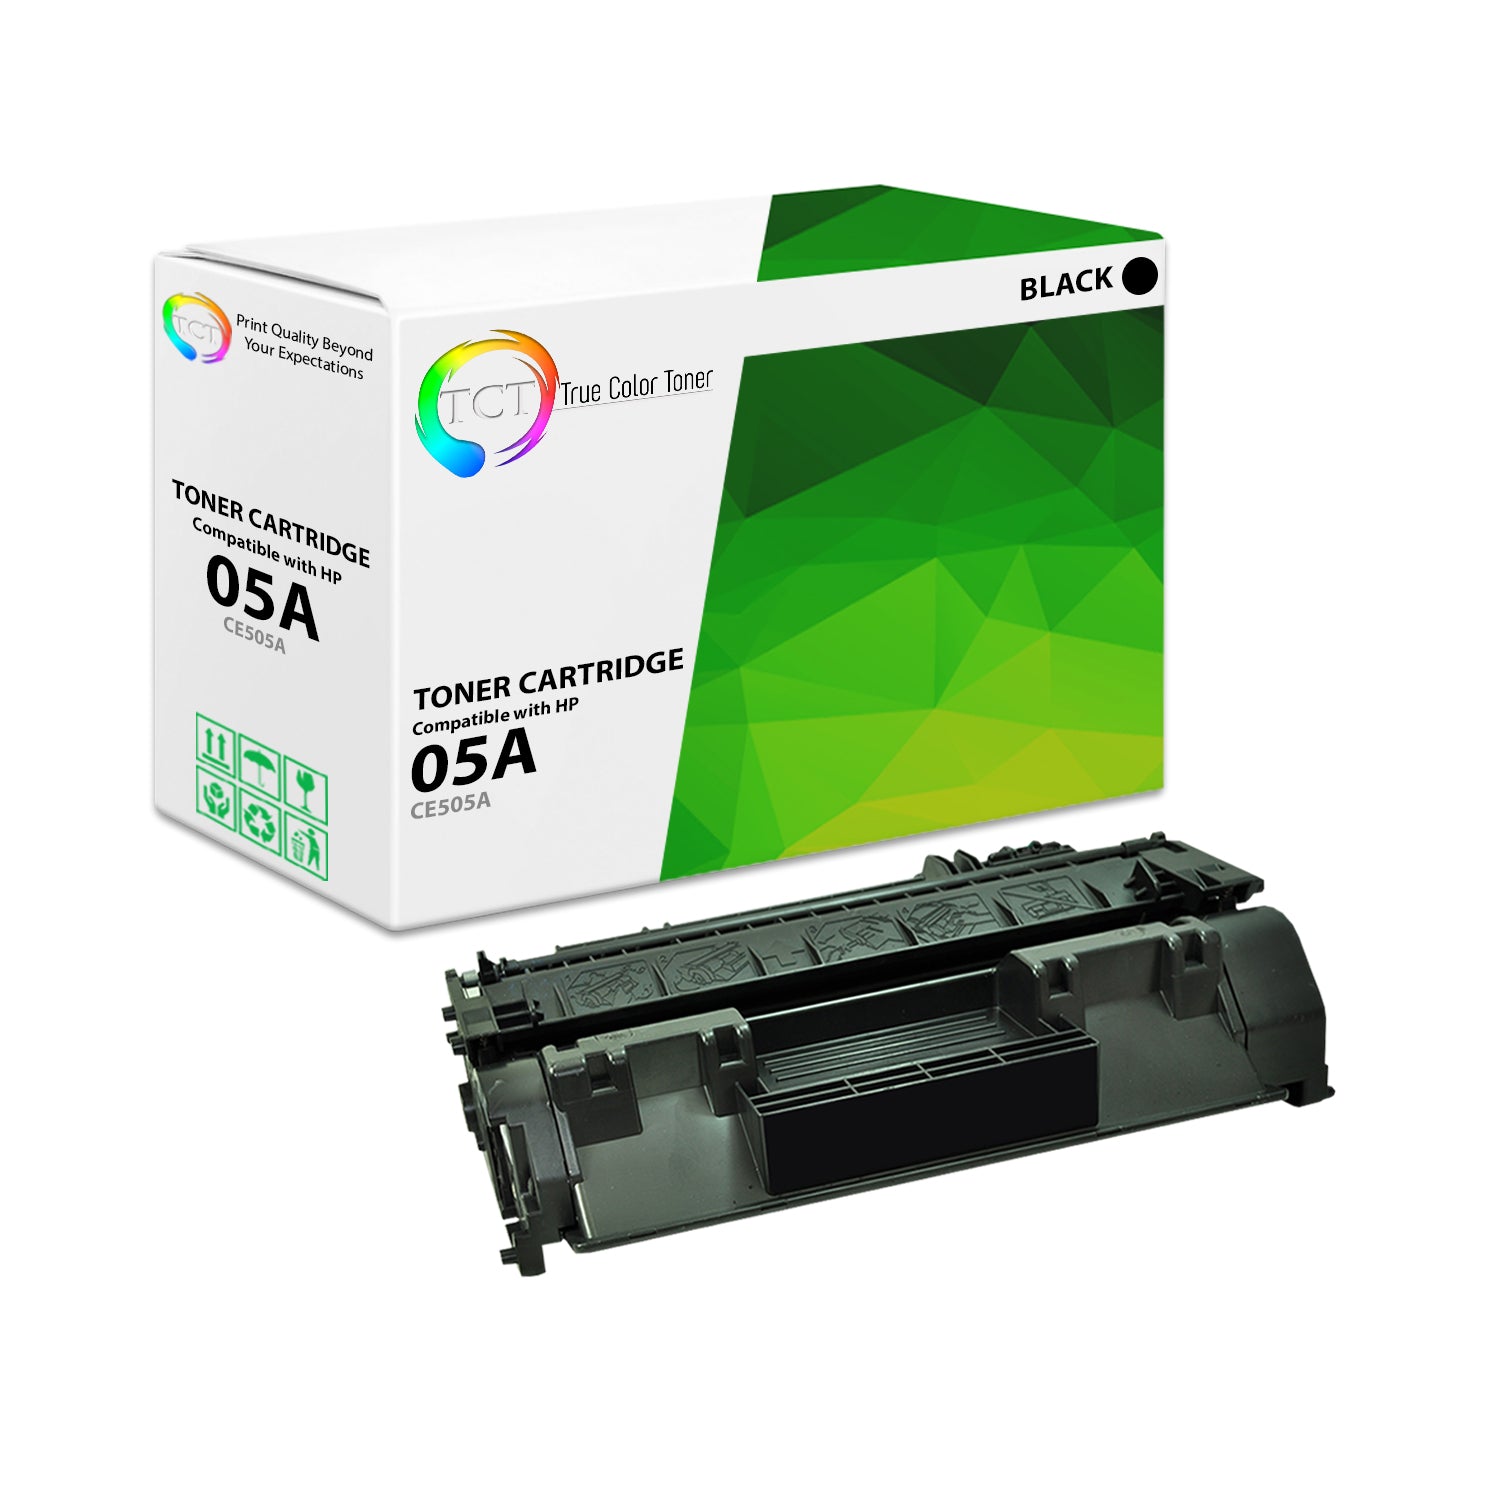 TCT Compatible Toner Cartridge Replacement for the HP 05A Series - 1 Pack Black